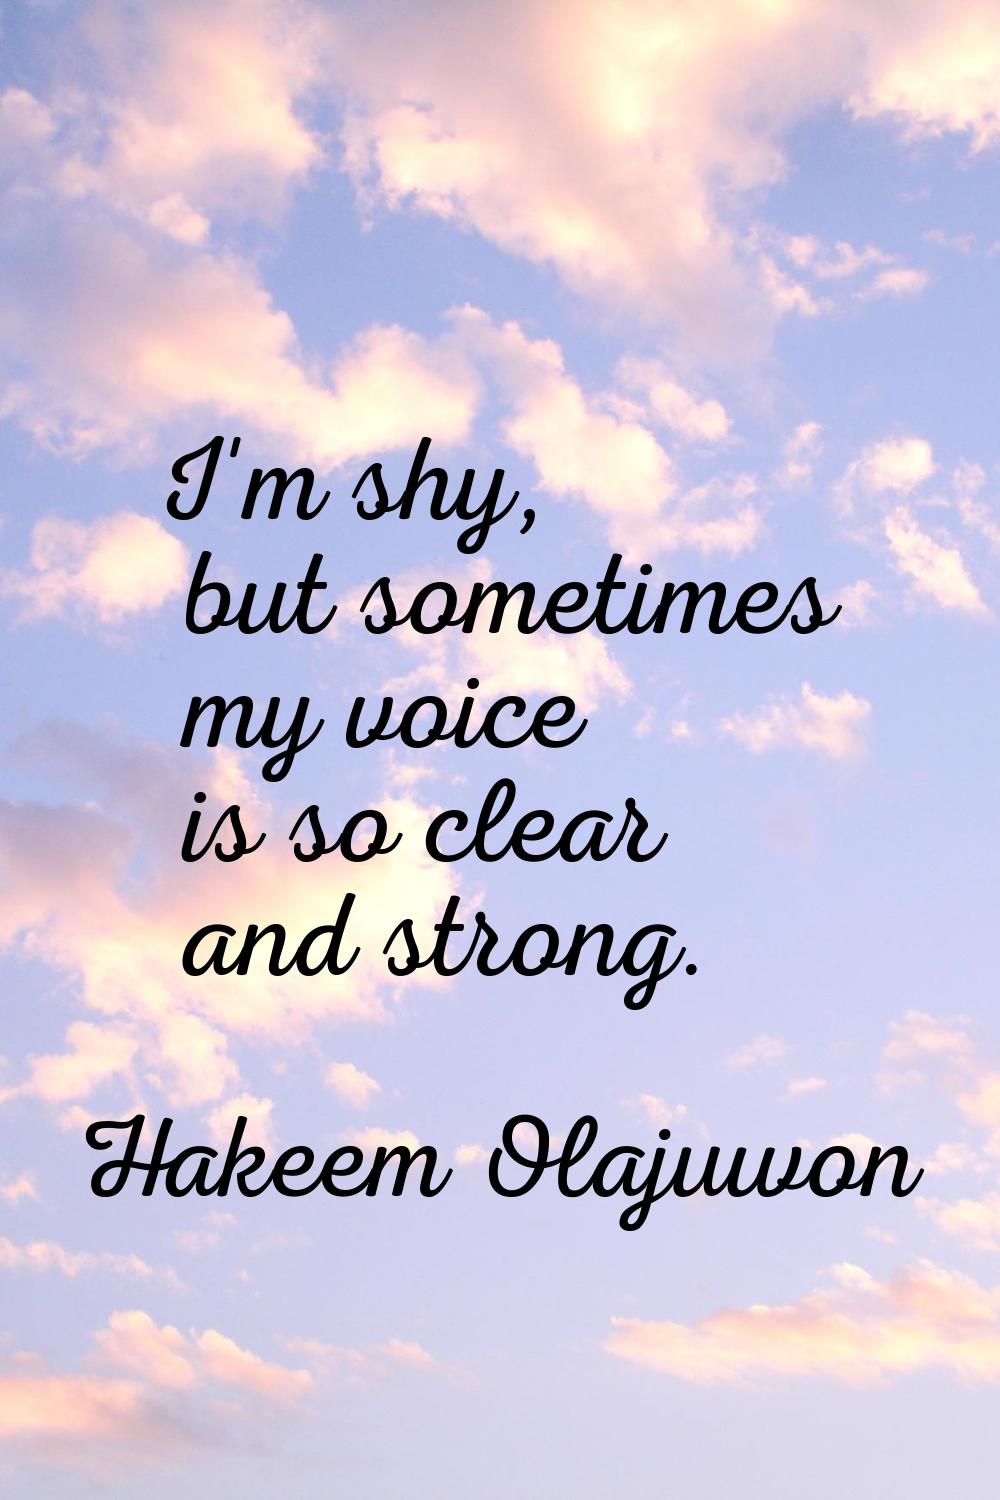 I'm shy, but sometimes my voice is so clear and strong.